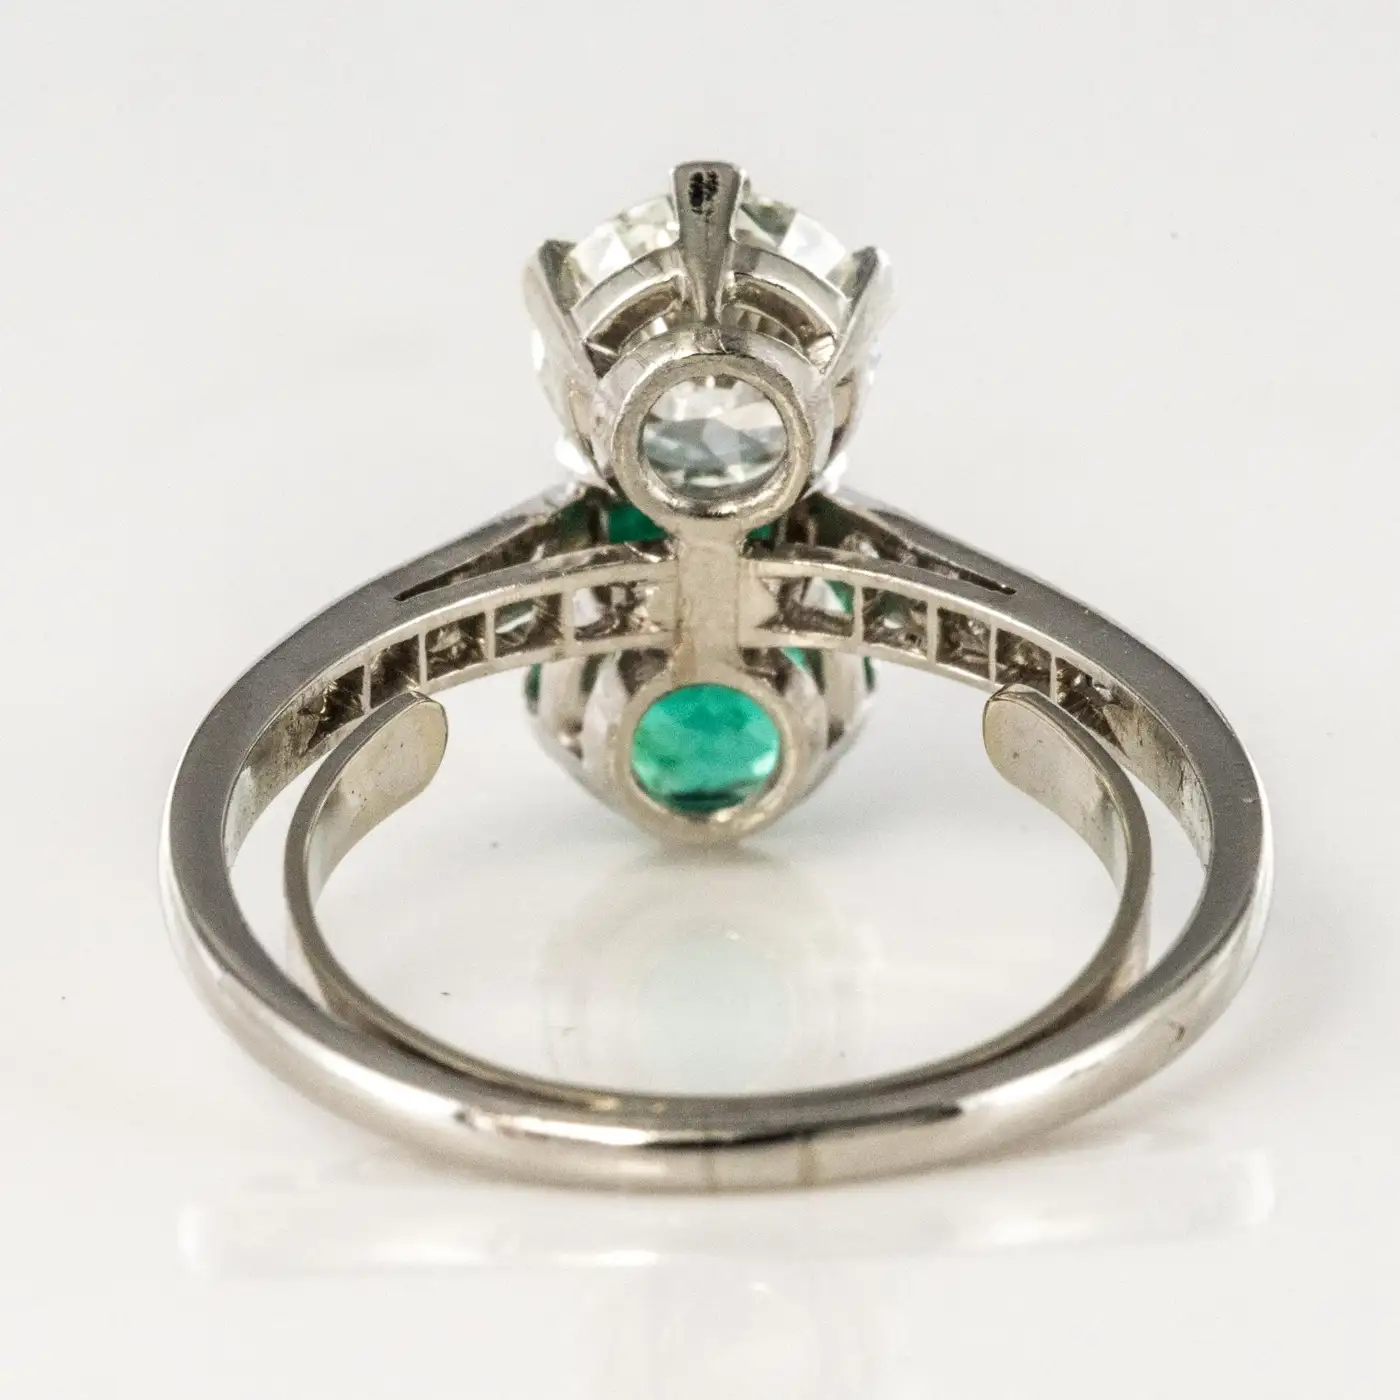 1930s-French-Platinum-Art-Deco-Emerald-Diamond-You-and-Me-Ring-11.webp